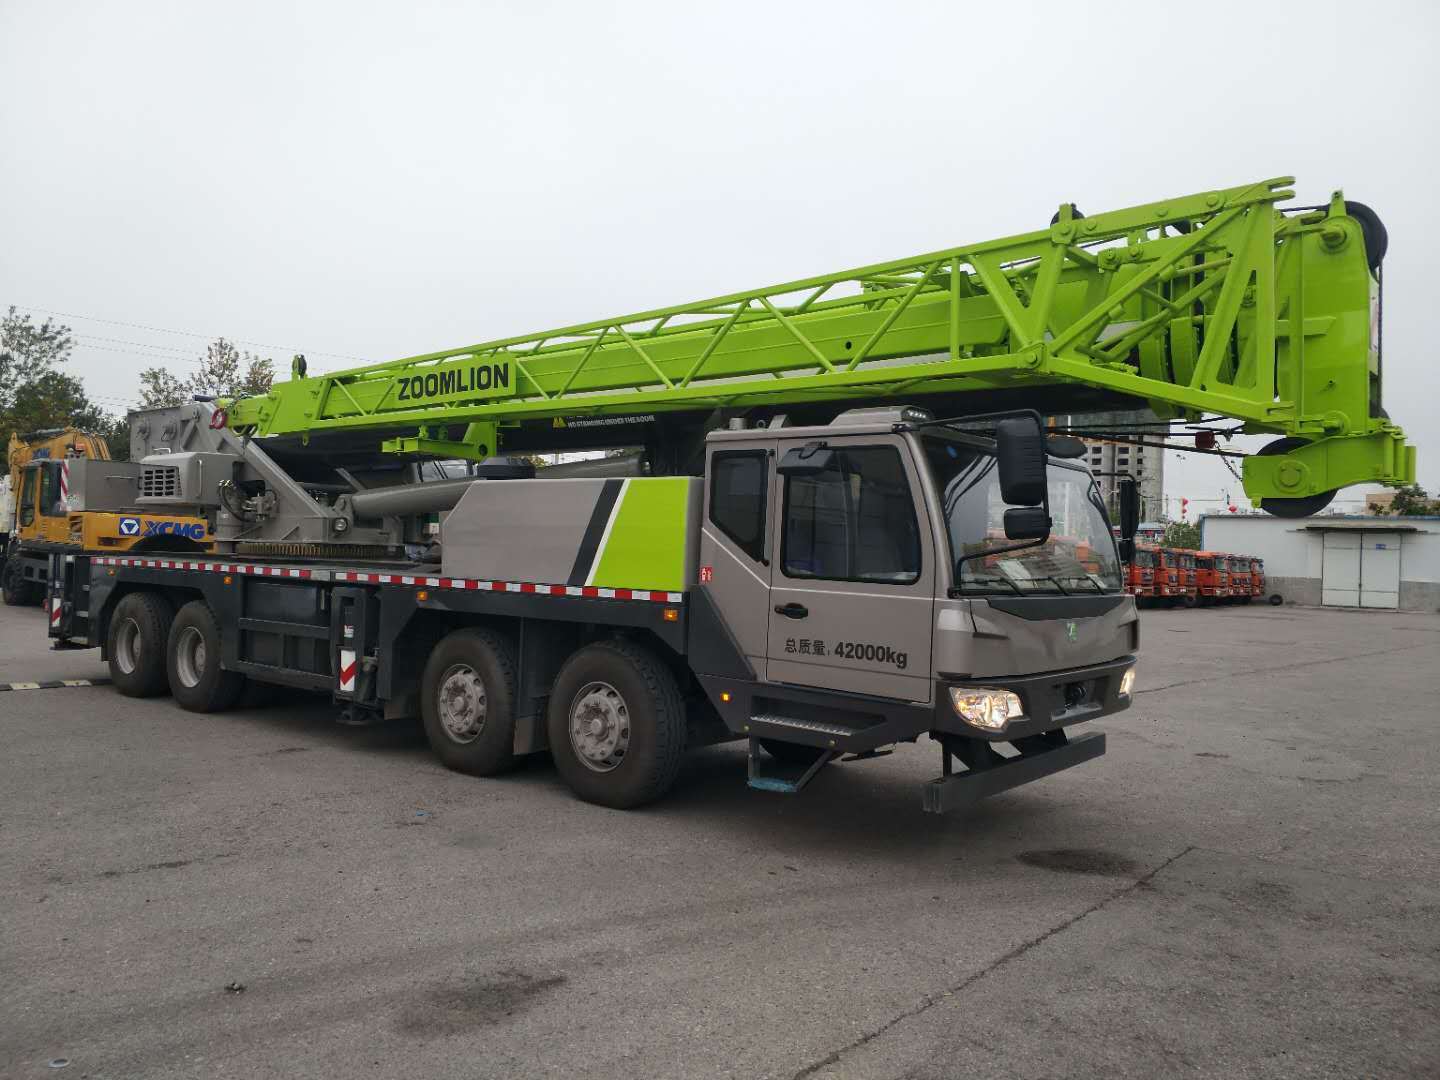 Zoomlion 55ton Qy55V552 Mobile Truck Crane with 43m Boom Length